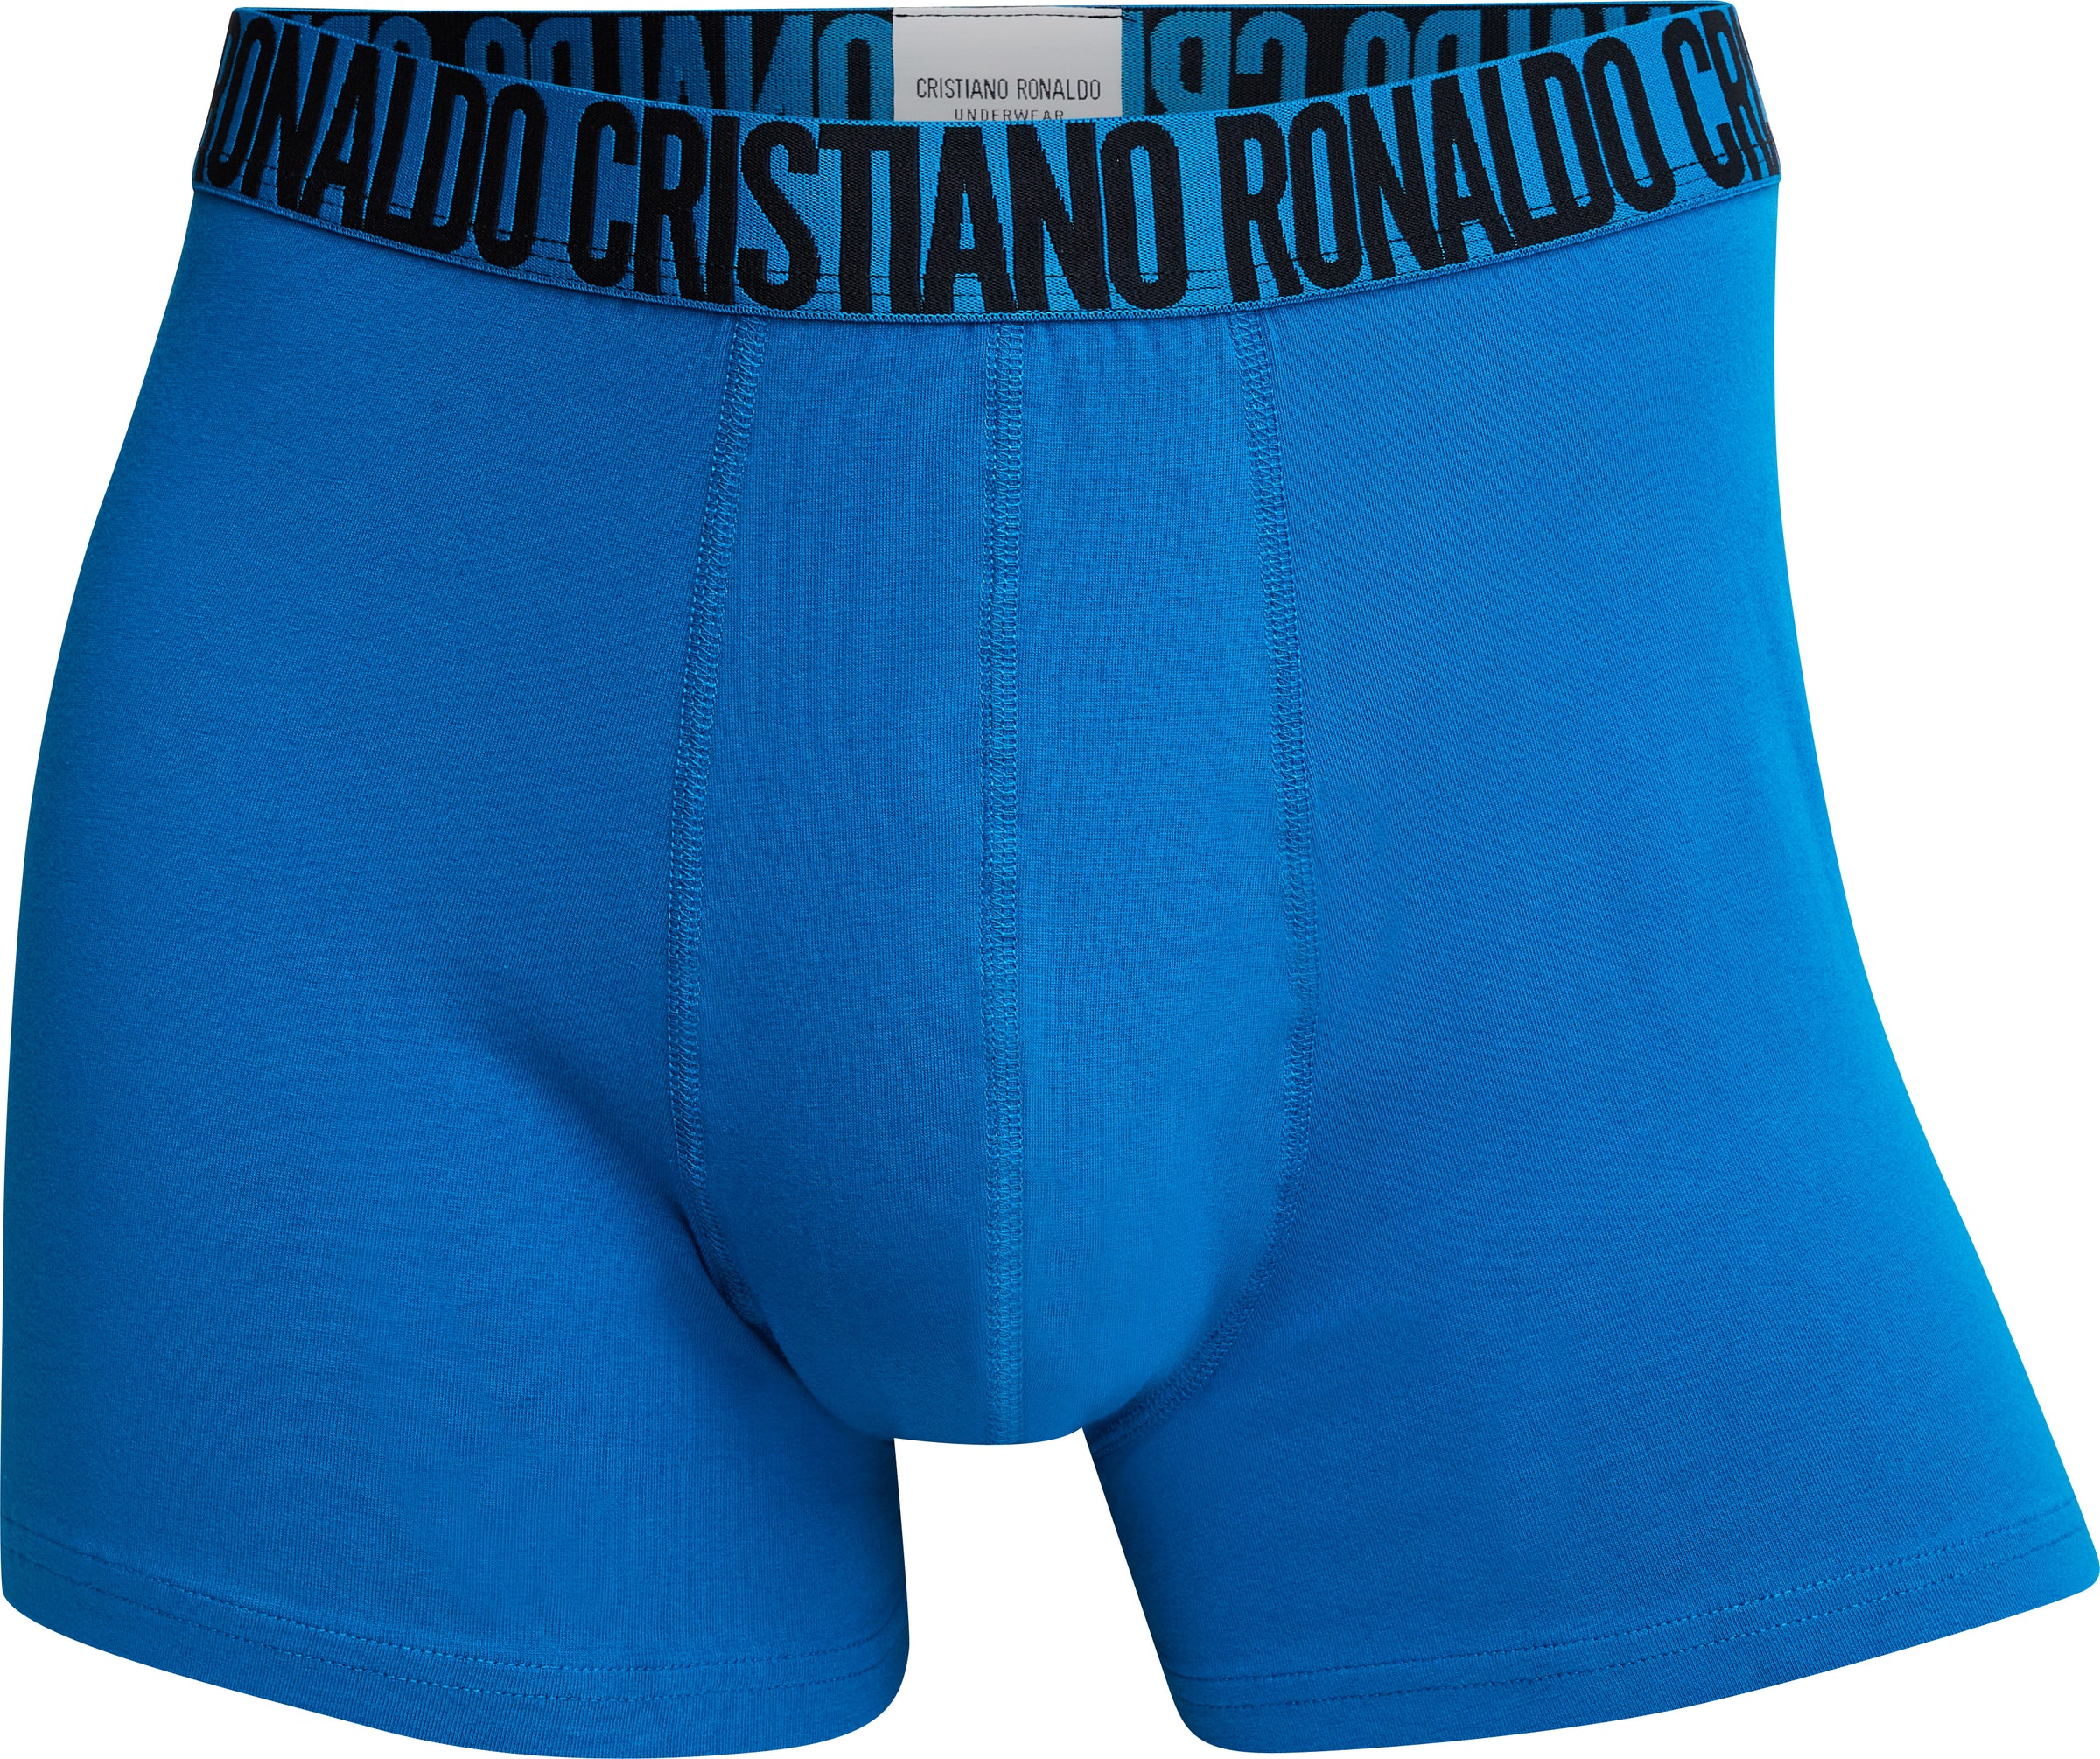  CR7 Men's 3-Pack Microfiber Trunks, Moss Green, Black, Camou,  Large : Clothing, Shoes & Jewelry